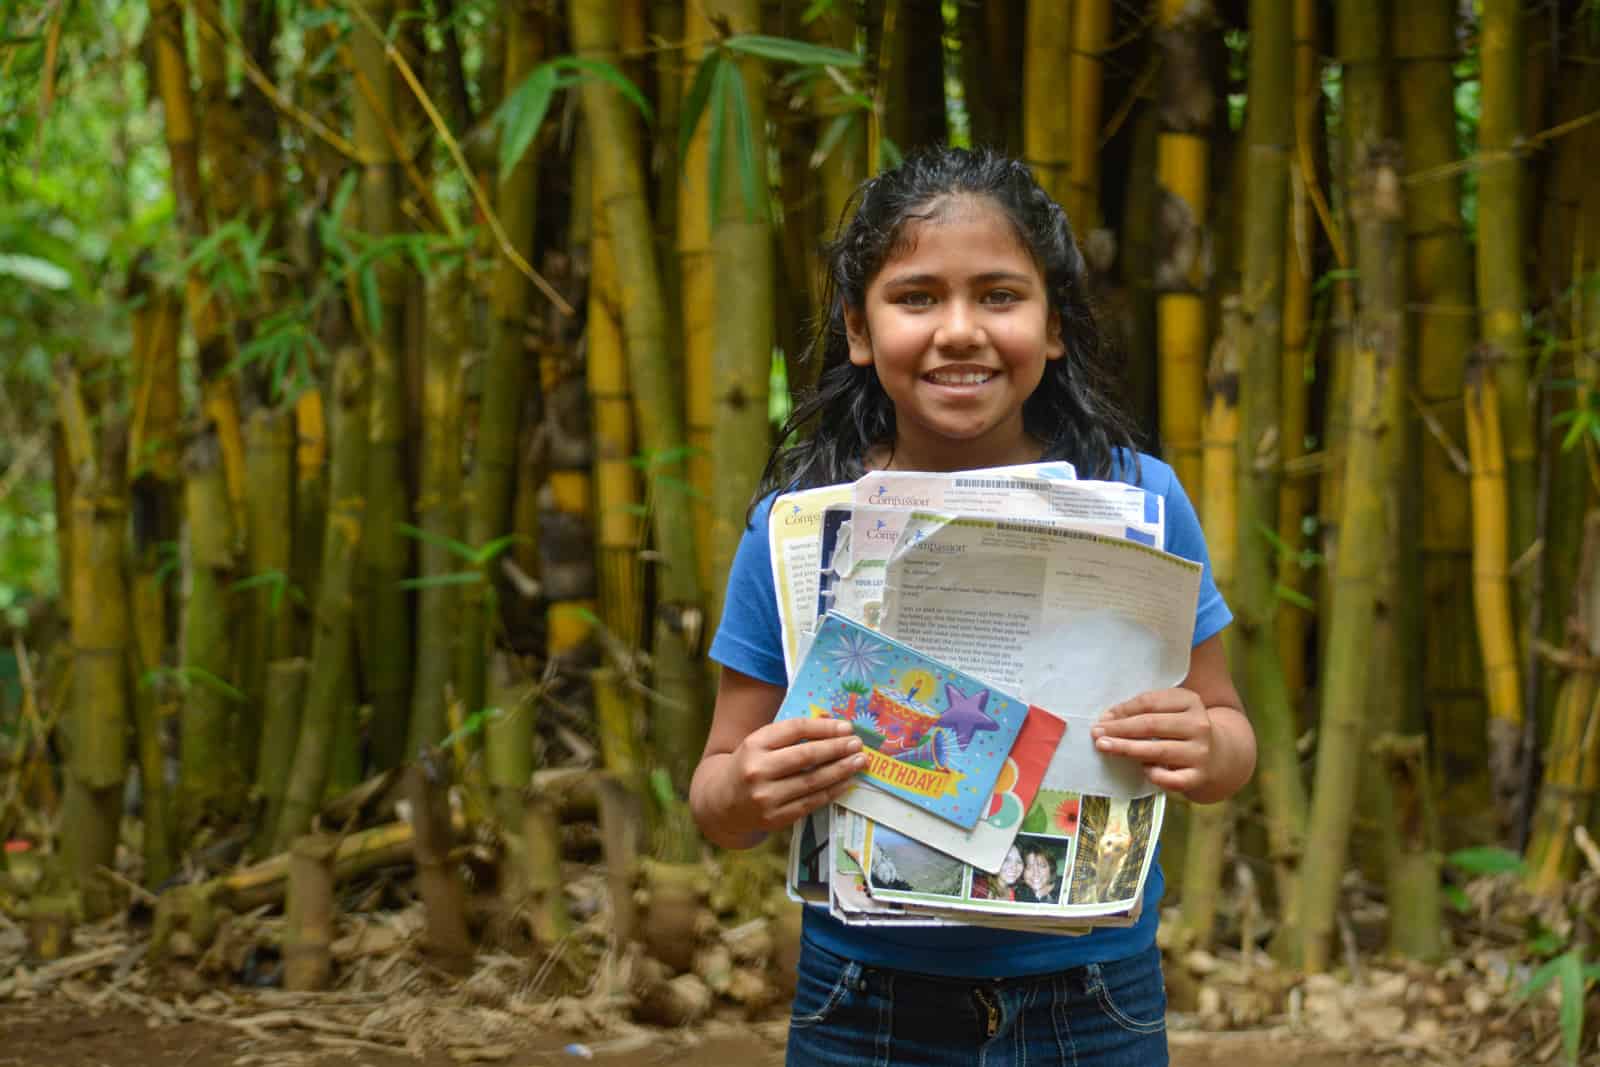 A young girl in a blue shirt and jeans stands in front of a stand of bamboo, holding letters